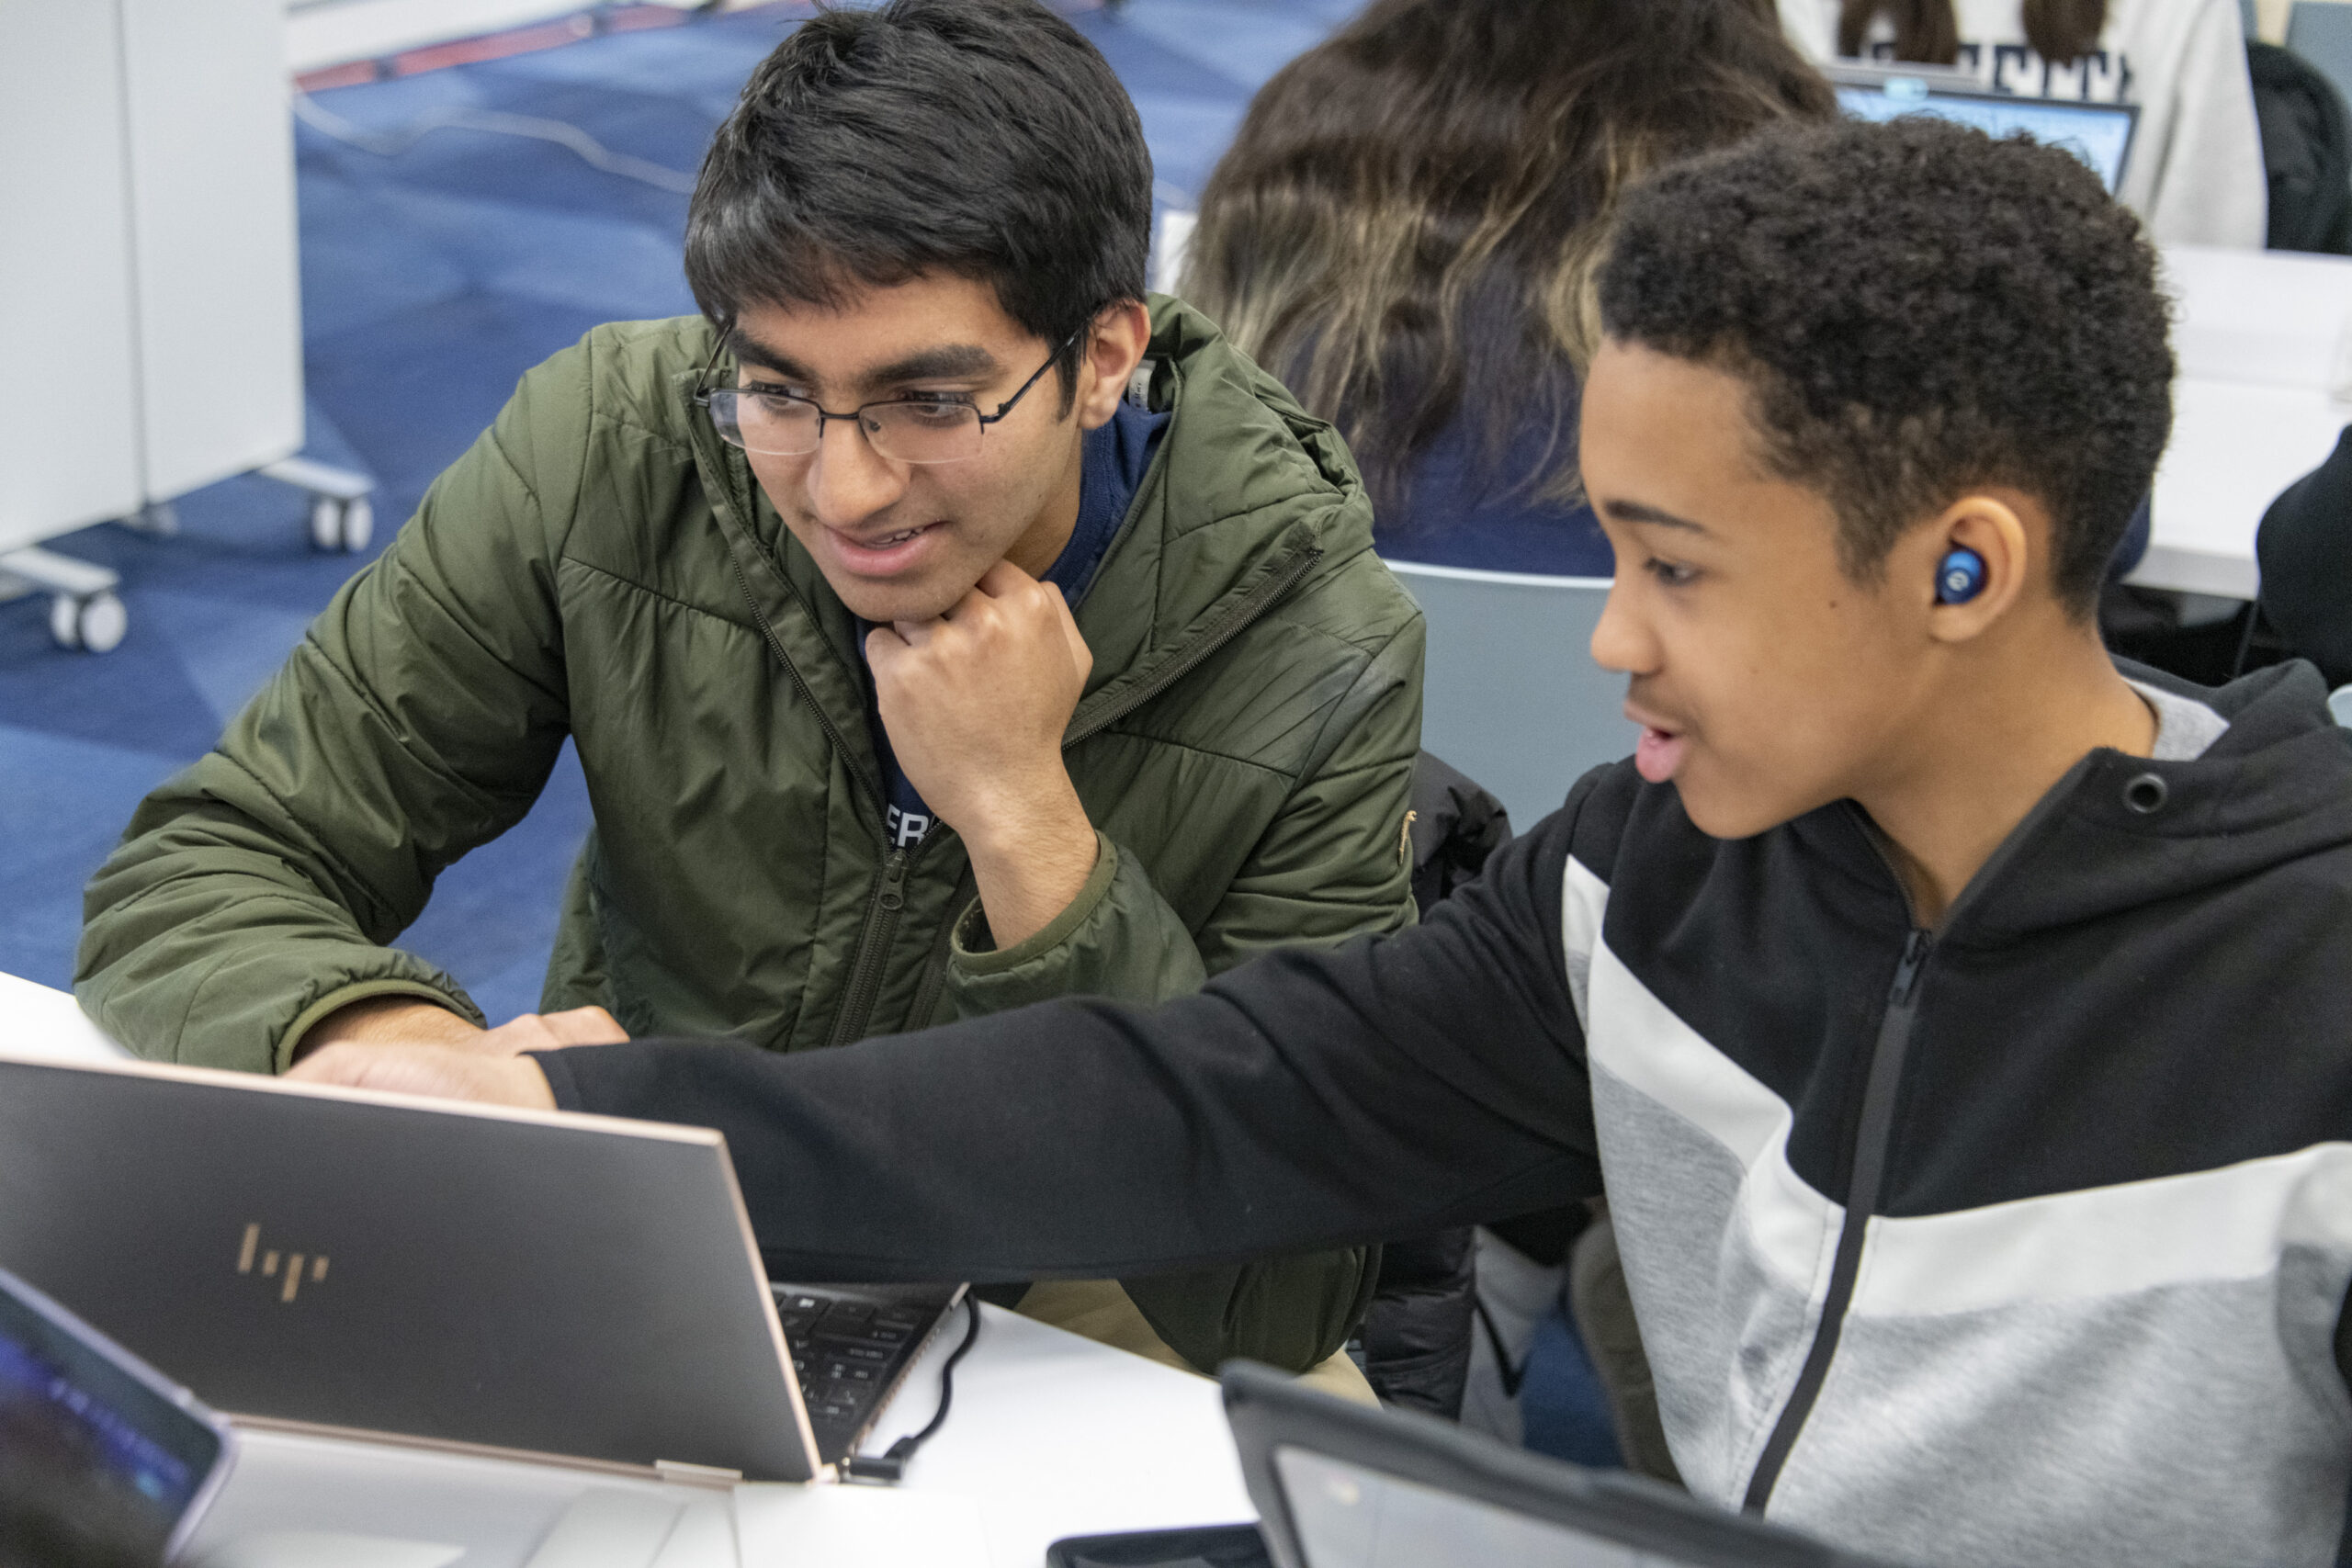 Two students sit next to one another. Both are looking at a laptop, and one is pointing to something on the screen.